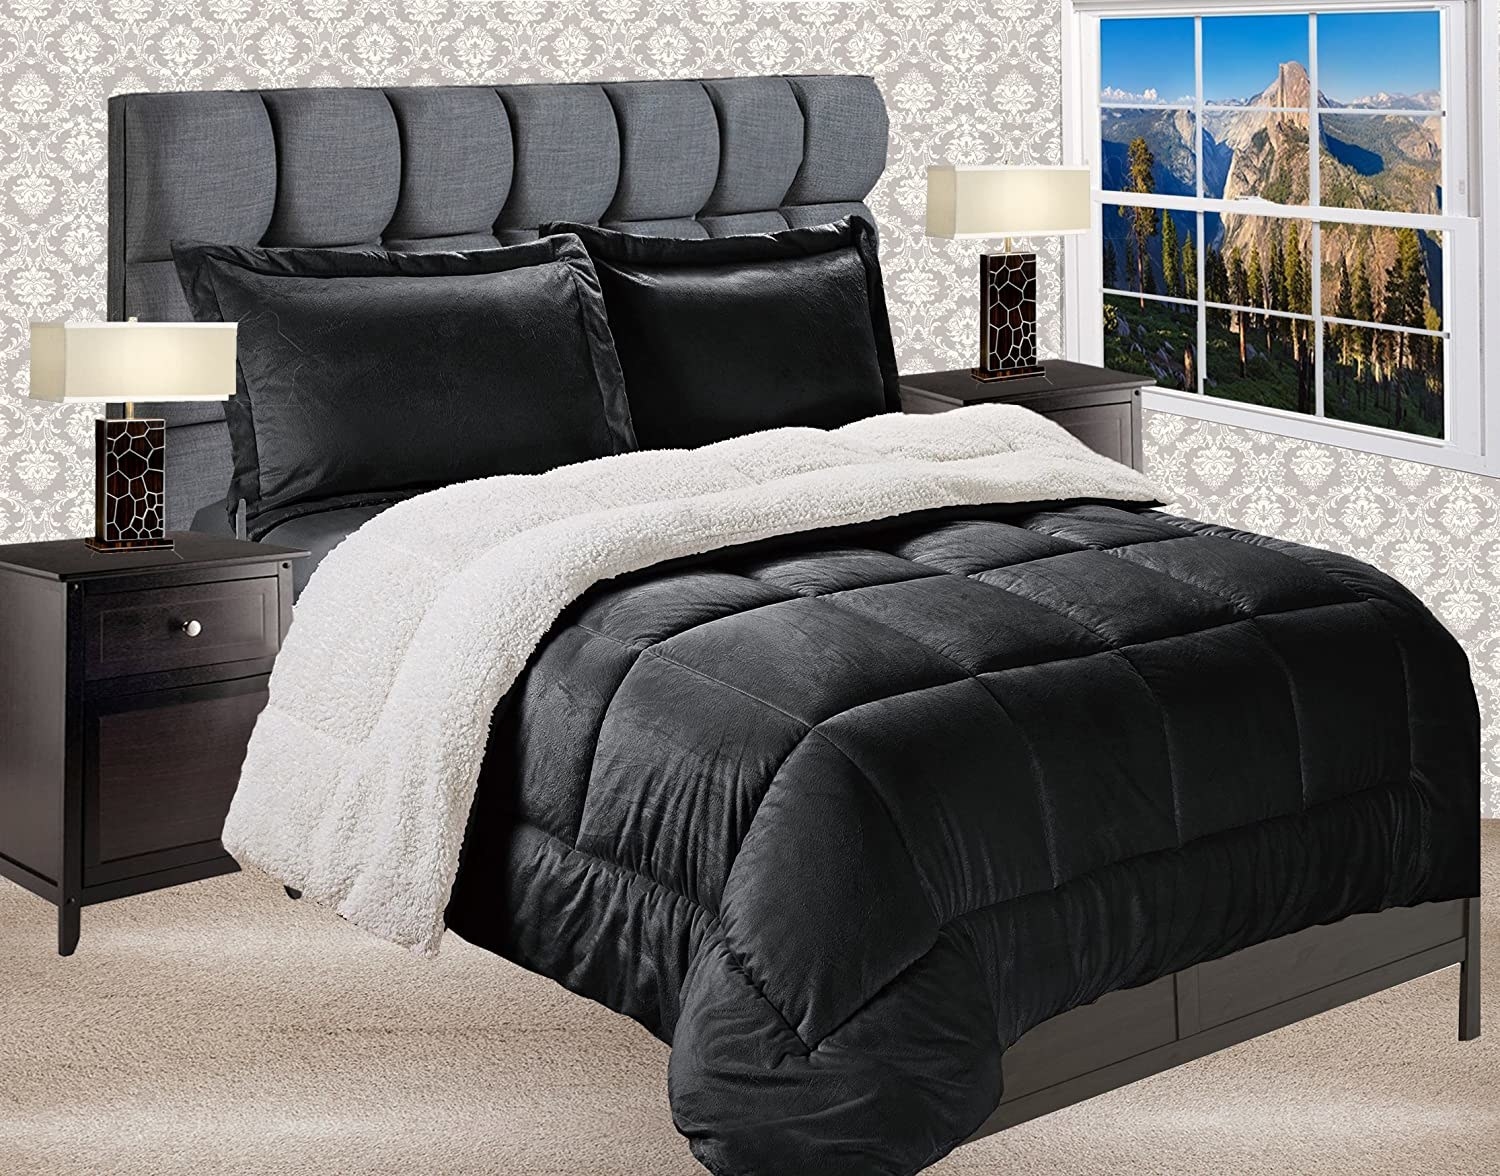 black comforter with fluffy white underside and black pillows on grey bed frame